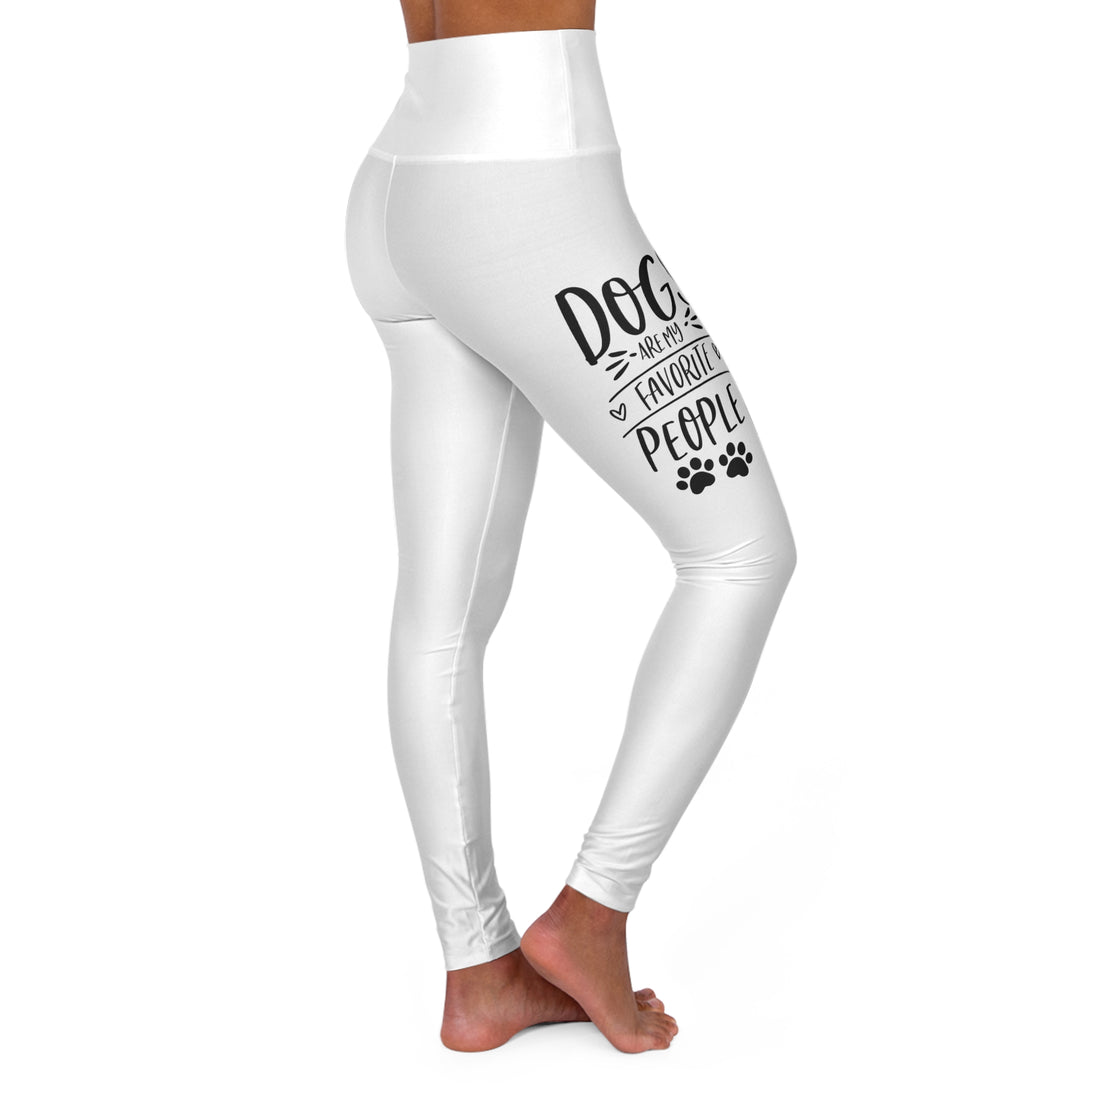 Dogs Are My Favorite People - White High Waisted Yoga Leggings